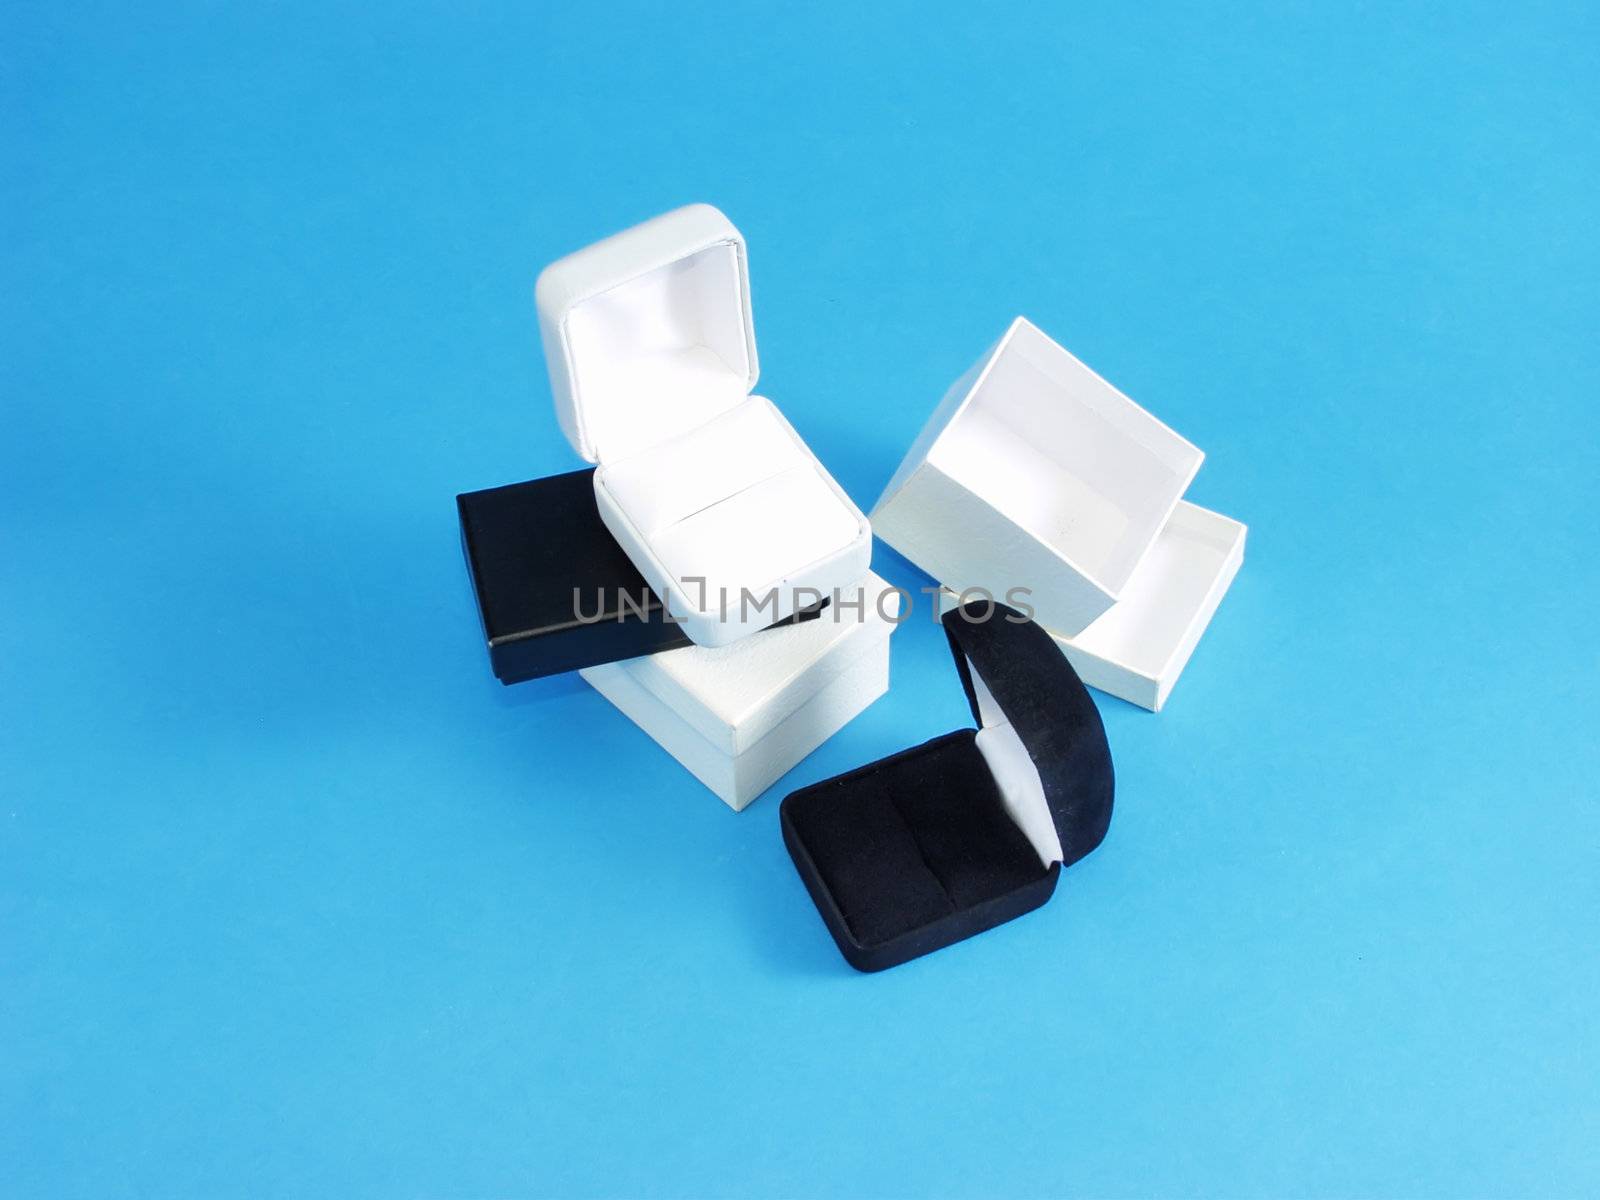 A set of two jewelry boxes, one black, one white, on an isolated blue background